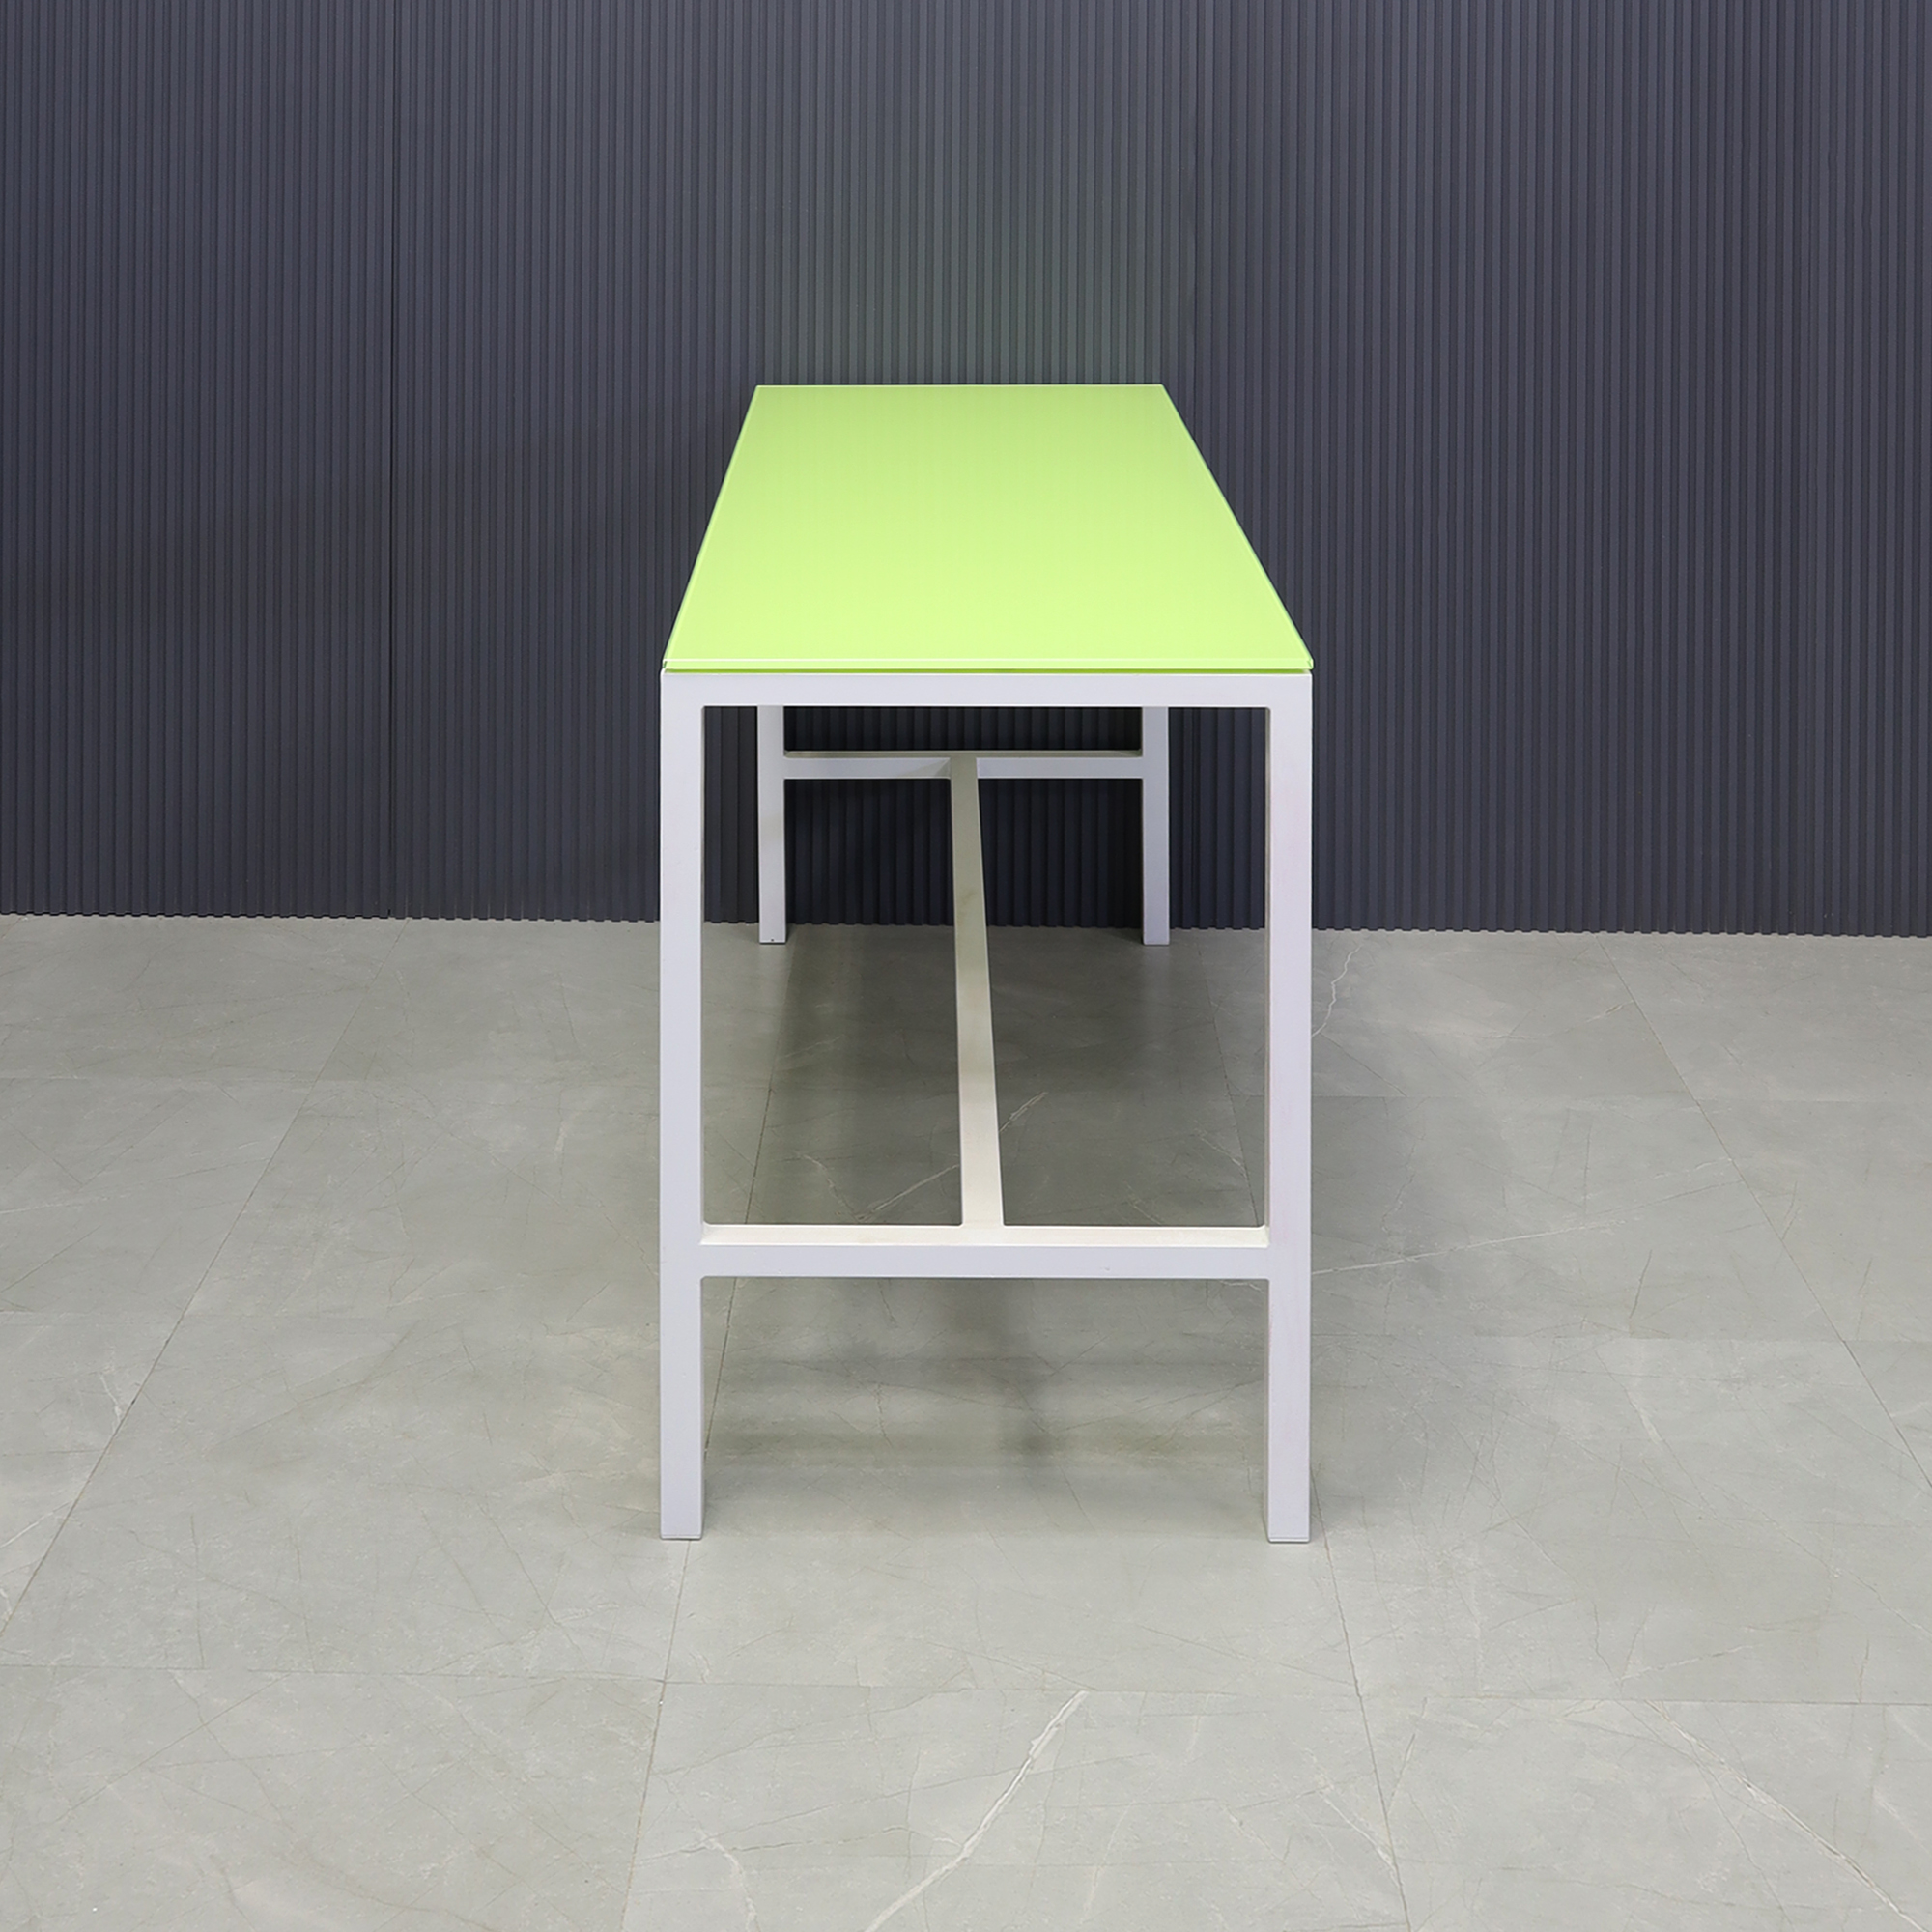 Aspen Tempered Glass Bar Table in lime top and white aluminum frame shown here.